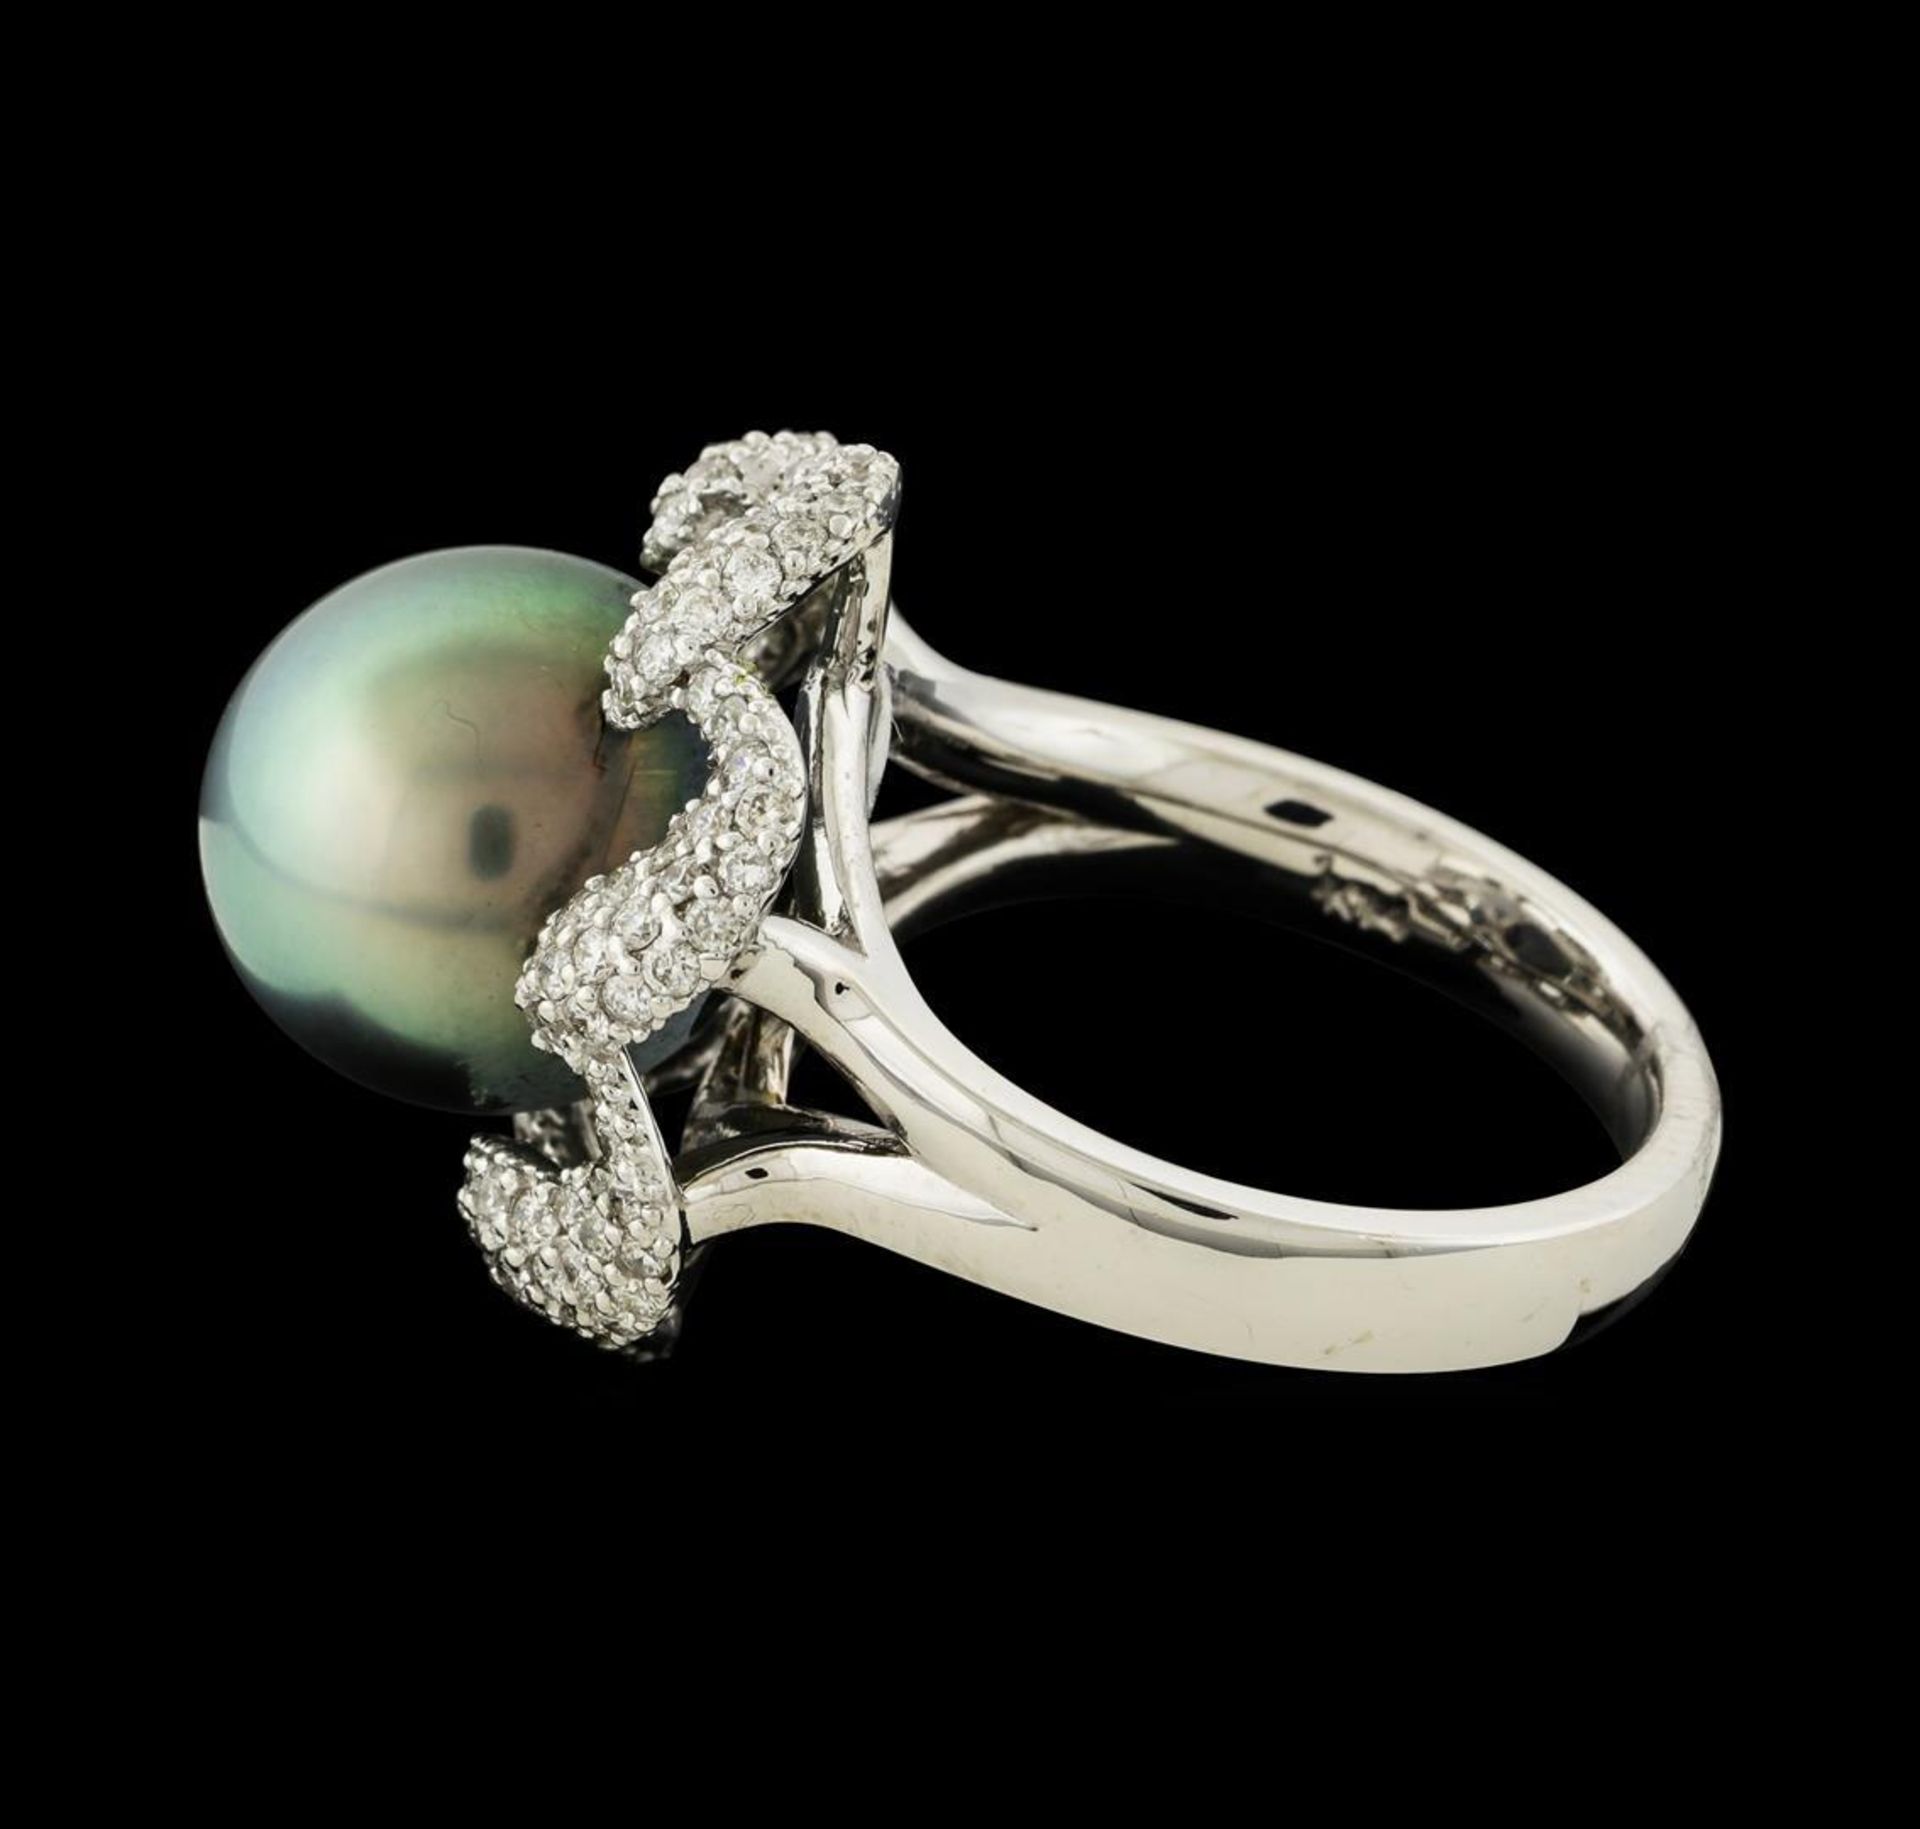 Pearl and Diamond Ring - 14KT White Gold - Image 3 of 5